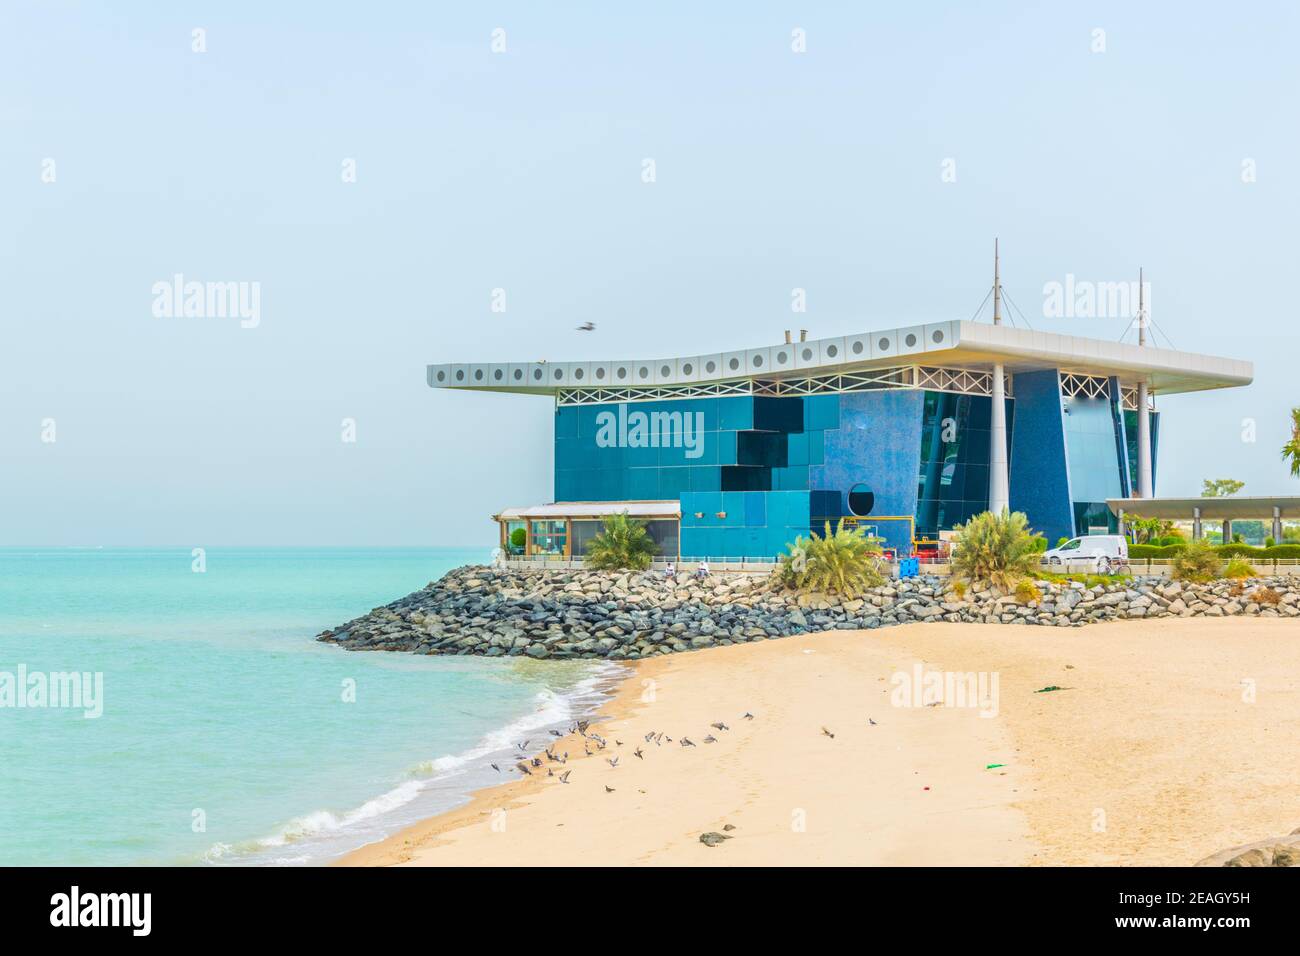 View of a seaside restaurant in Kuwait. Stock Photo